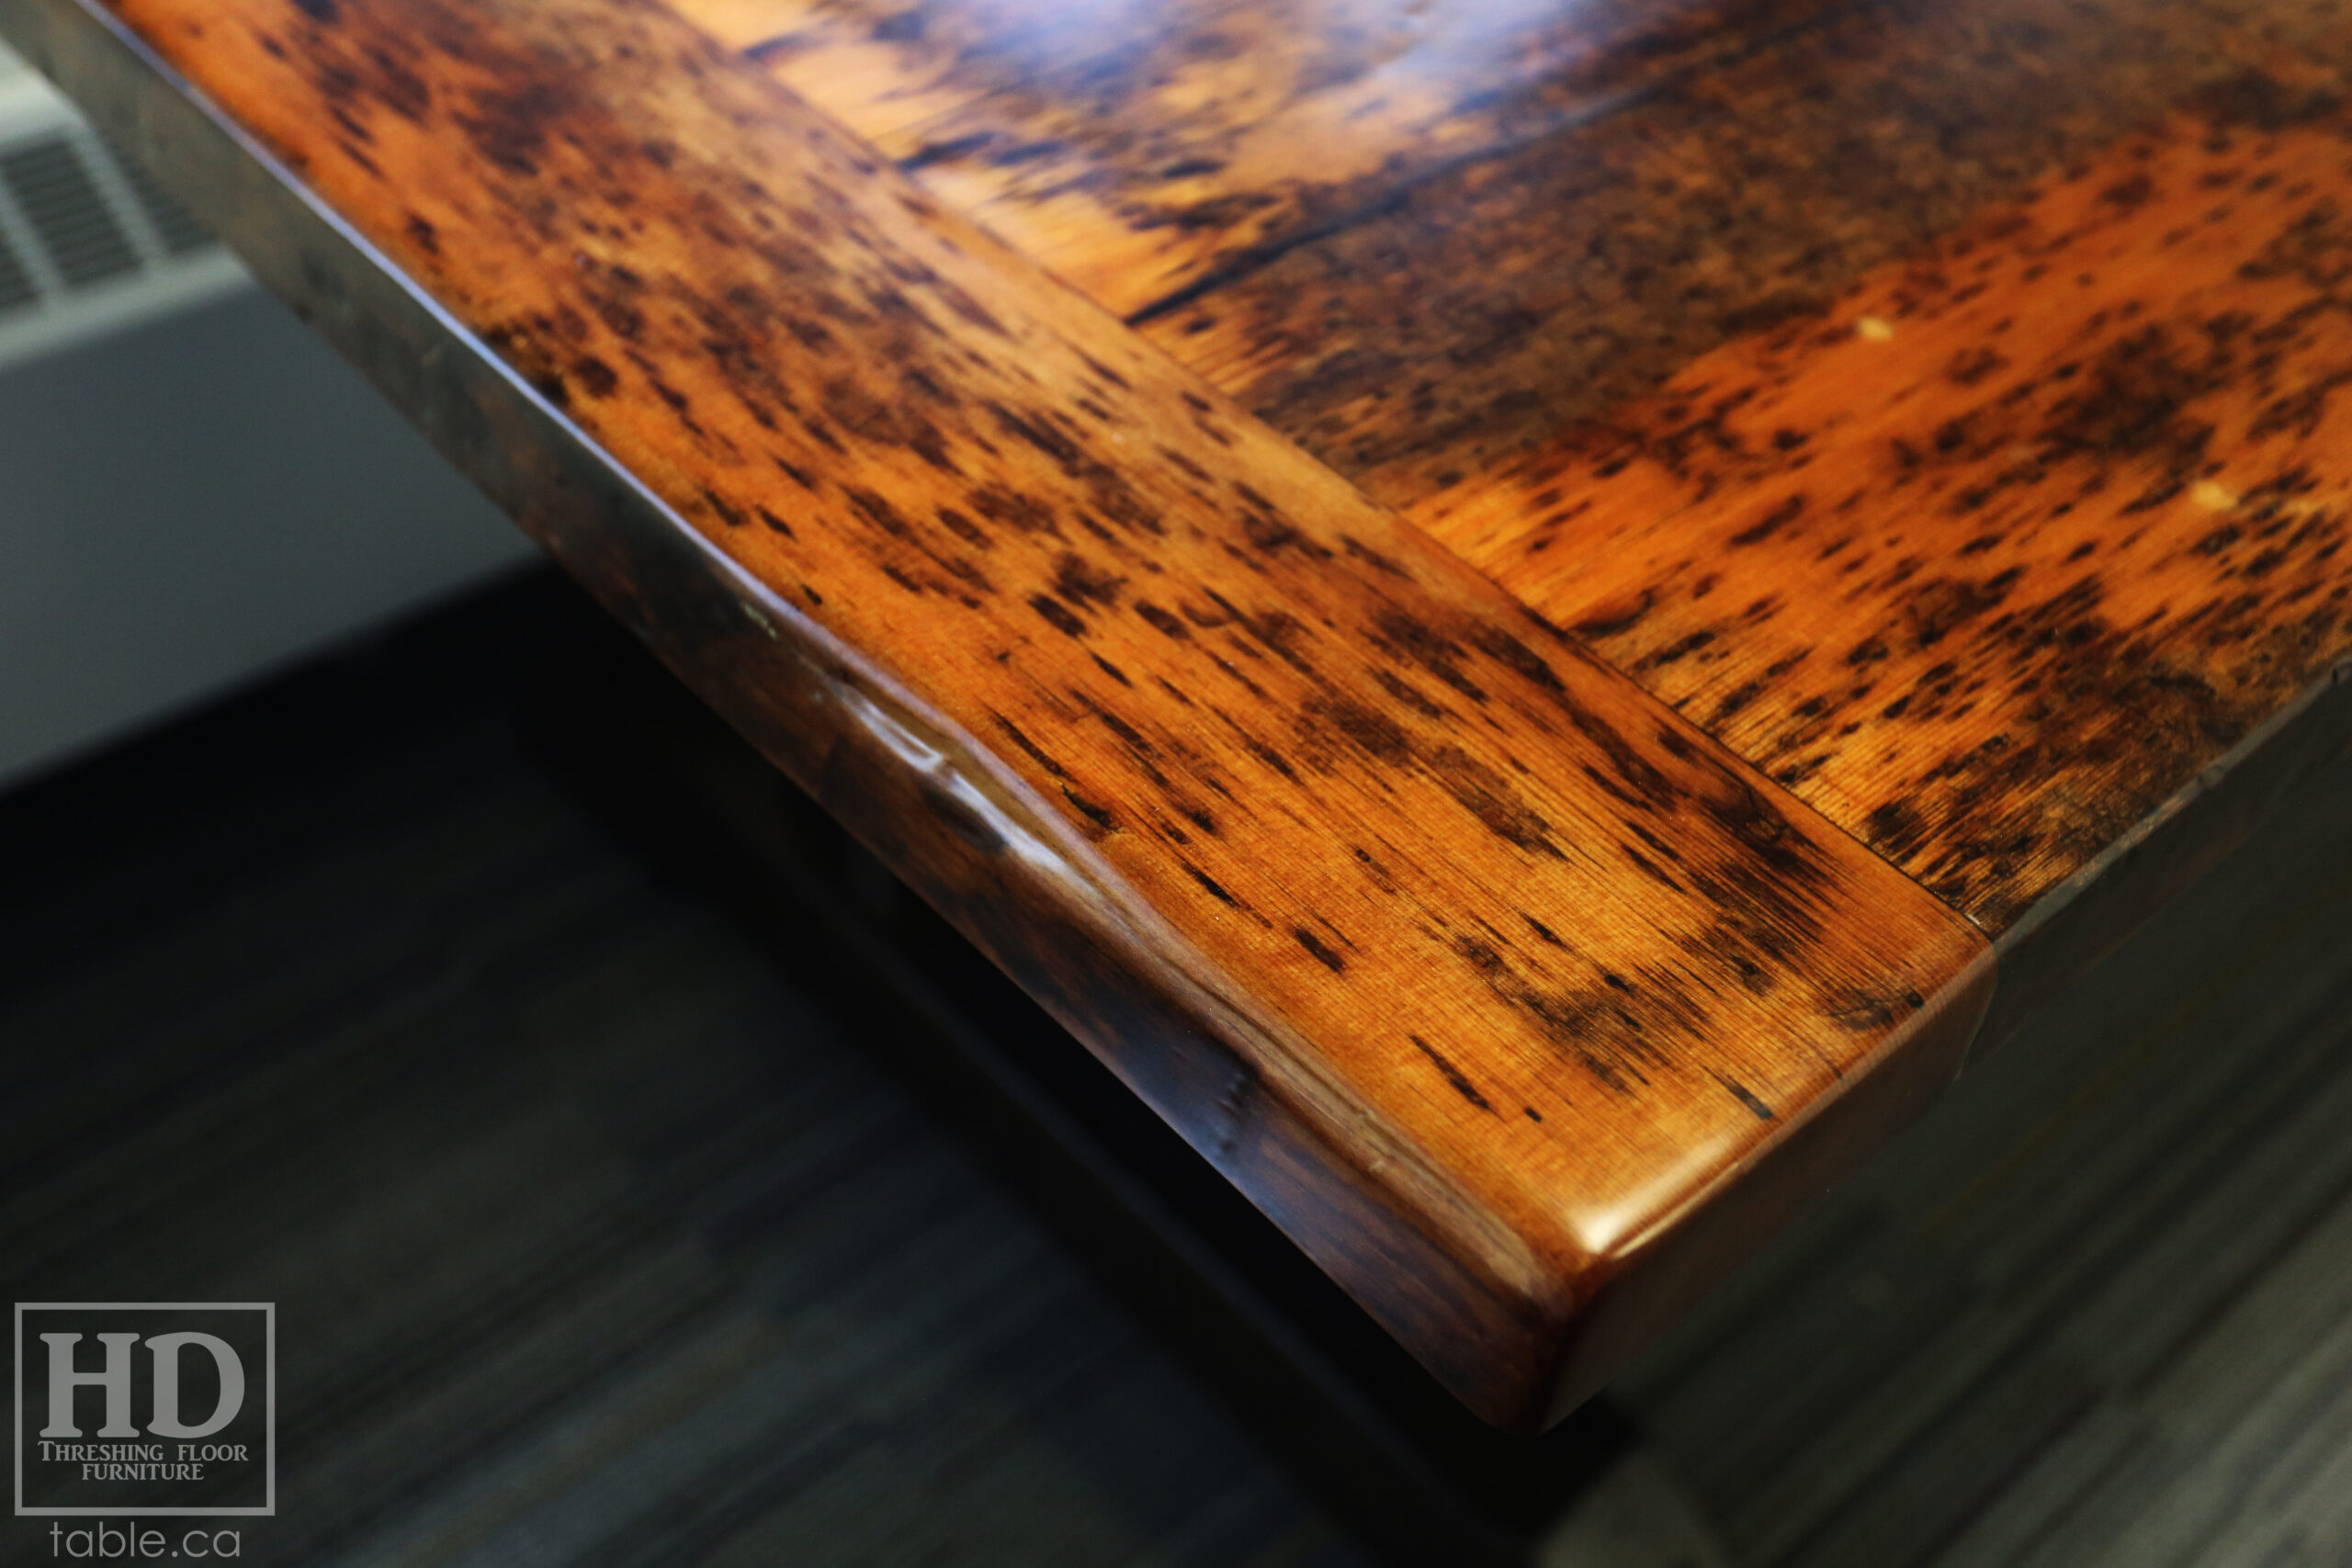 Boardroom Table made from Reclaimed Ontario Barnwood by HD Threshing Floor Furniture / www.table.ca